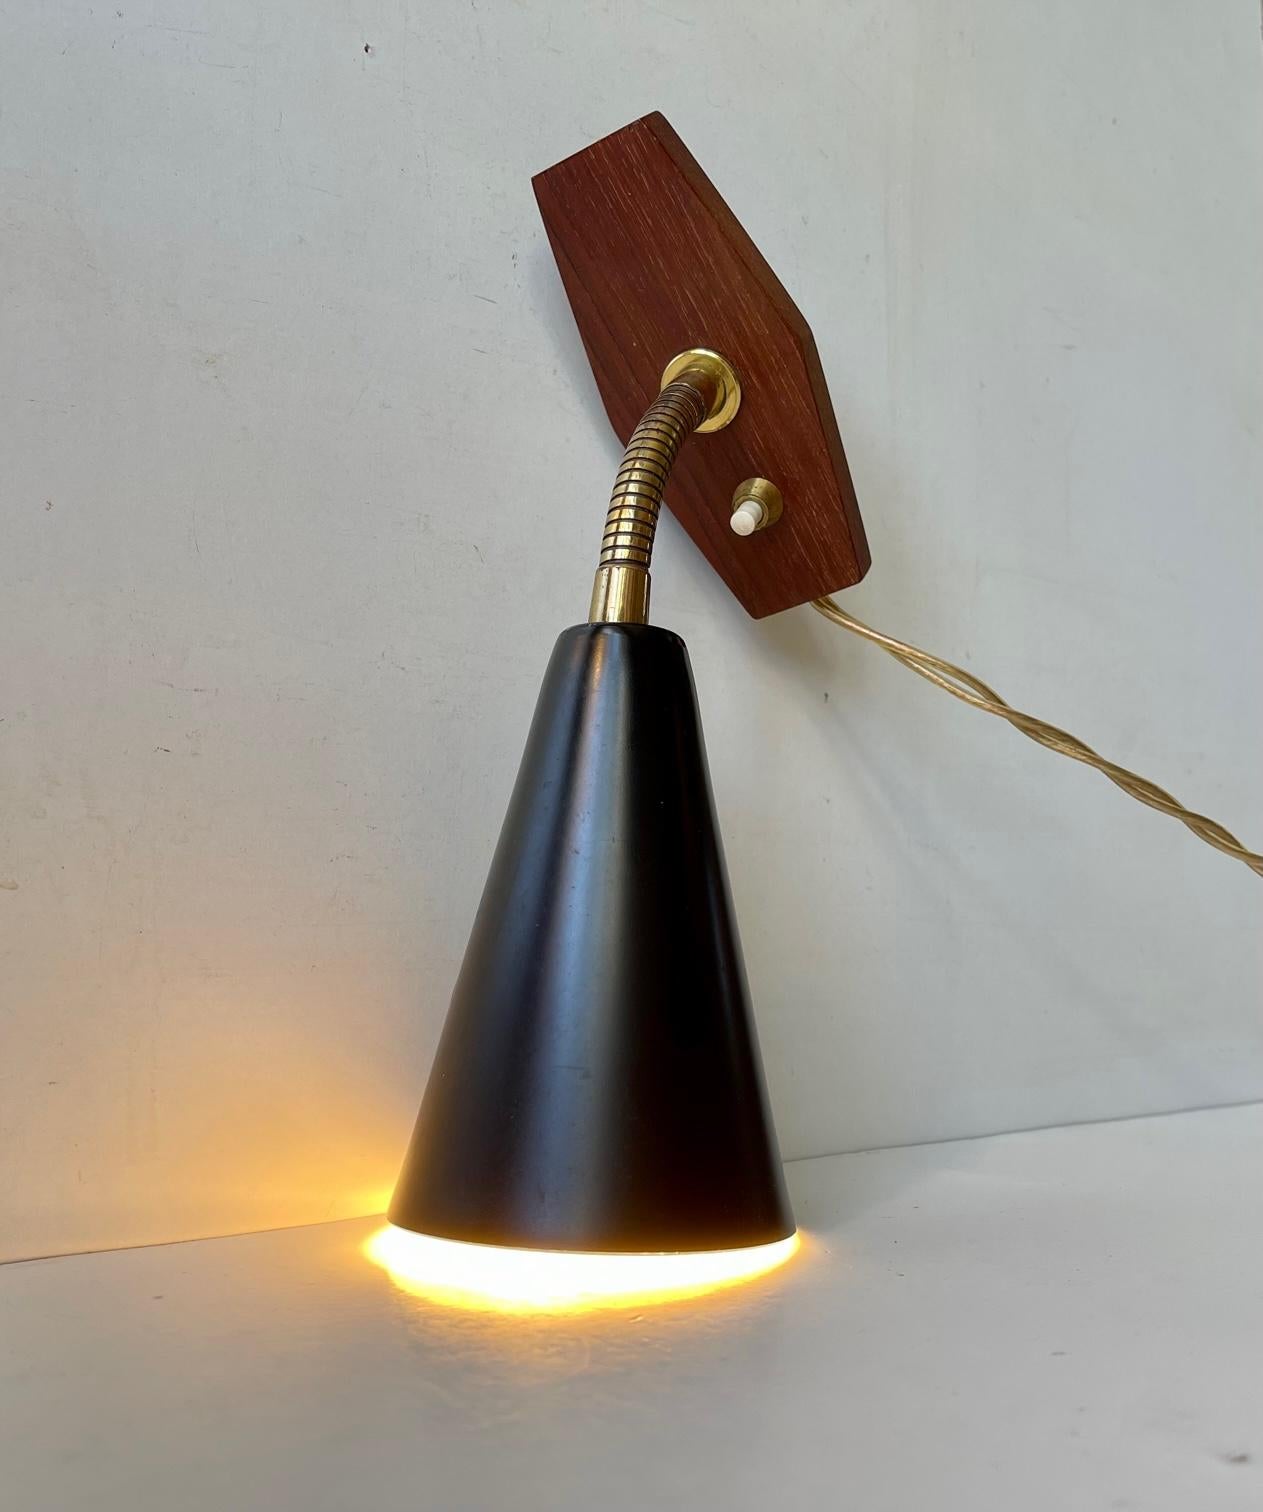 A swedish modern wall light made from teak, brass and powder coated aluminium. Designed and manufactured by ASEA in Sweden during the 1950s in a style reminiscent of Paavo Tynell and Hans Bergstrom. The light will be sold and shipped in working